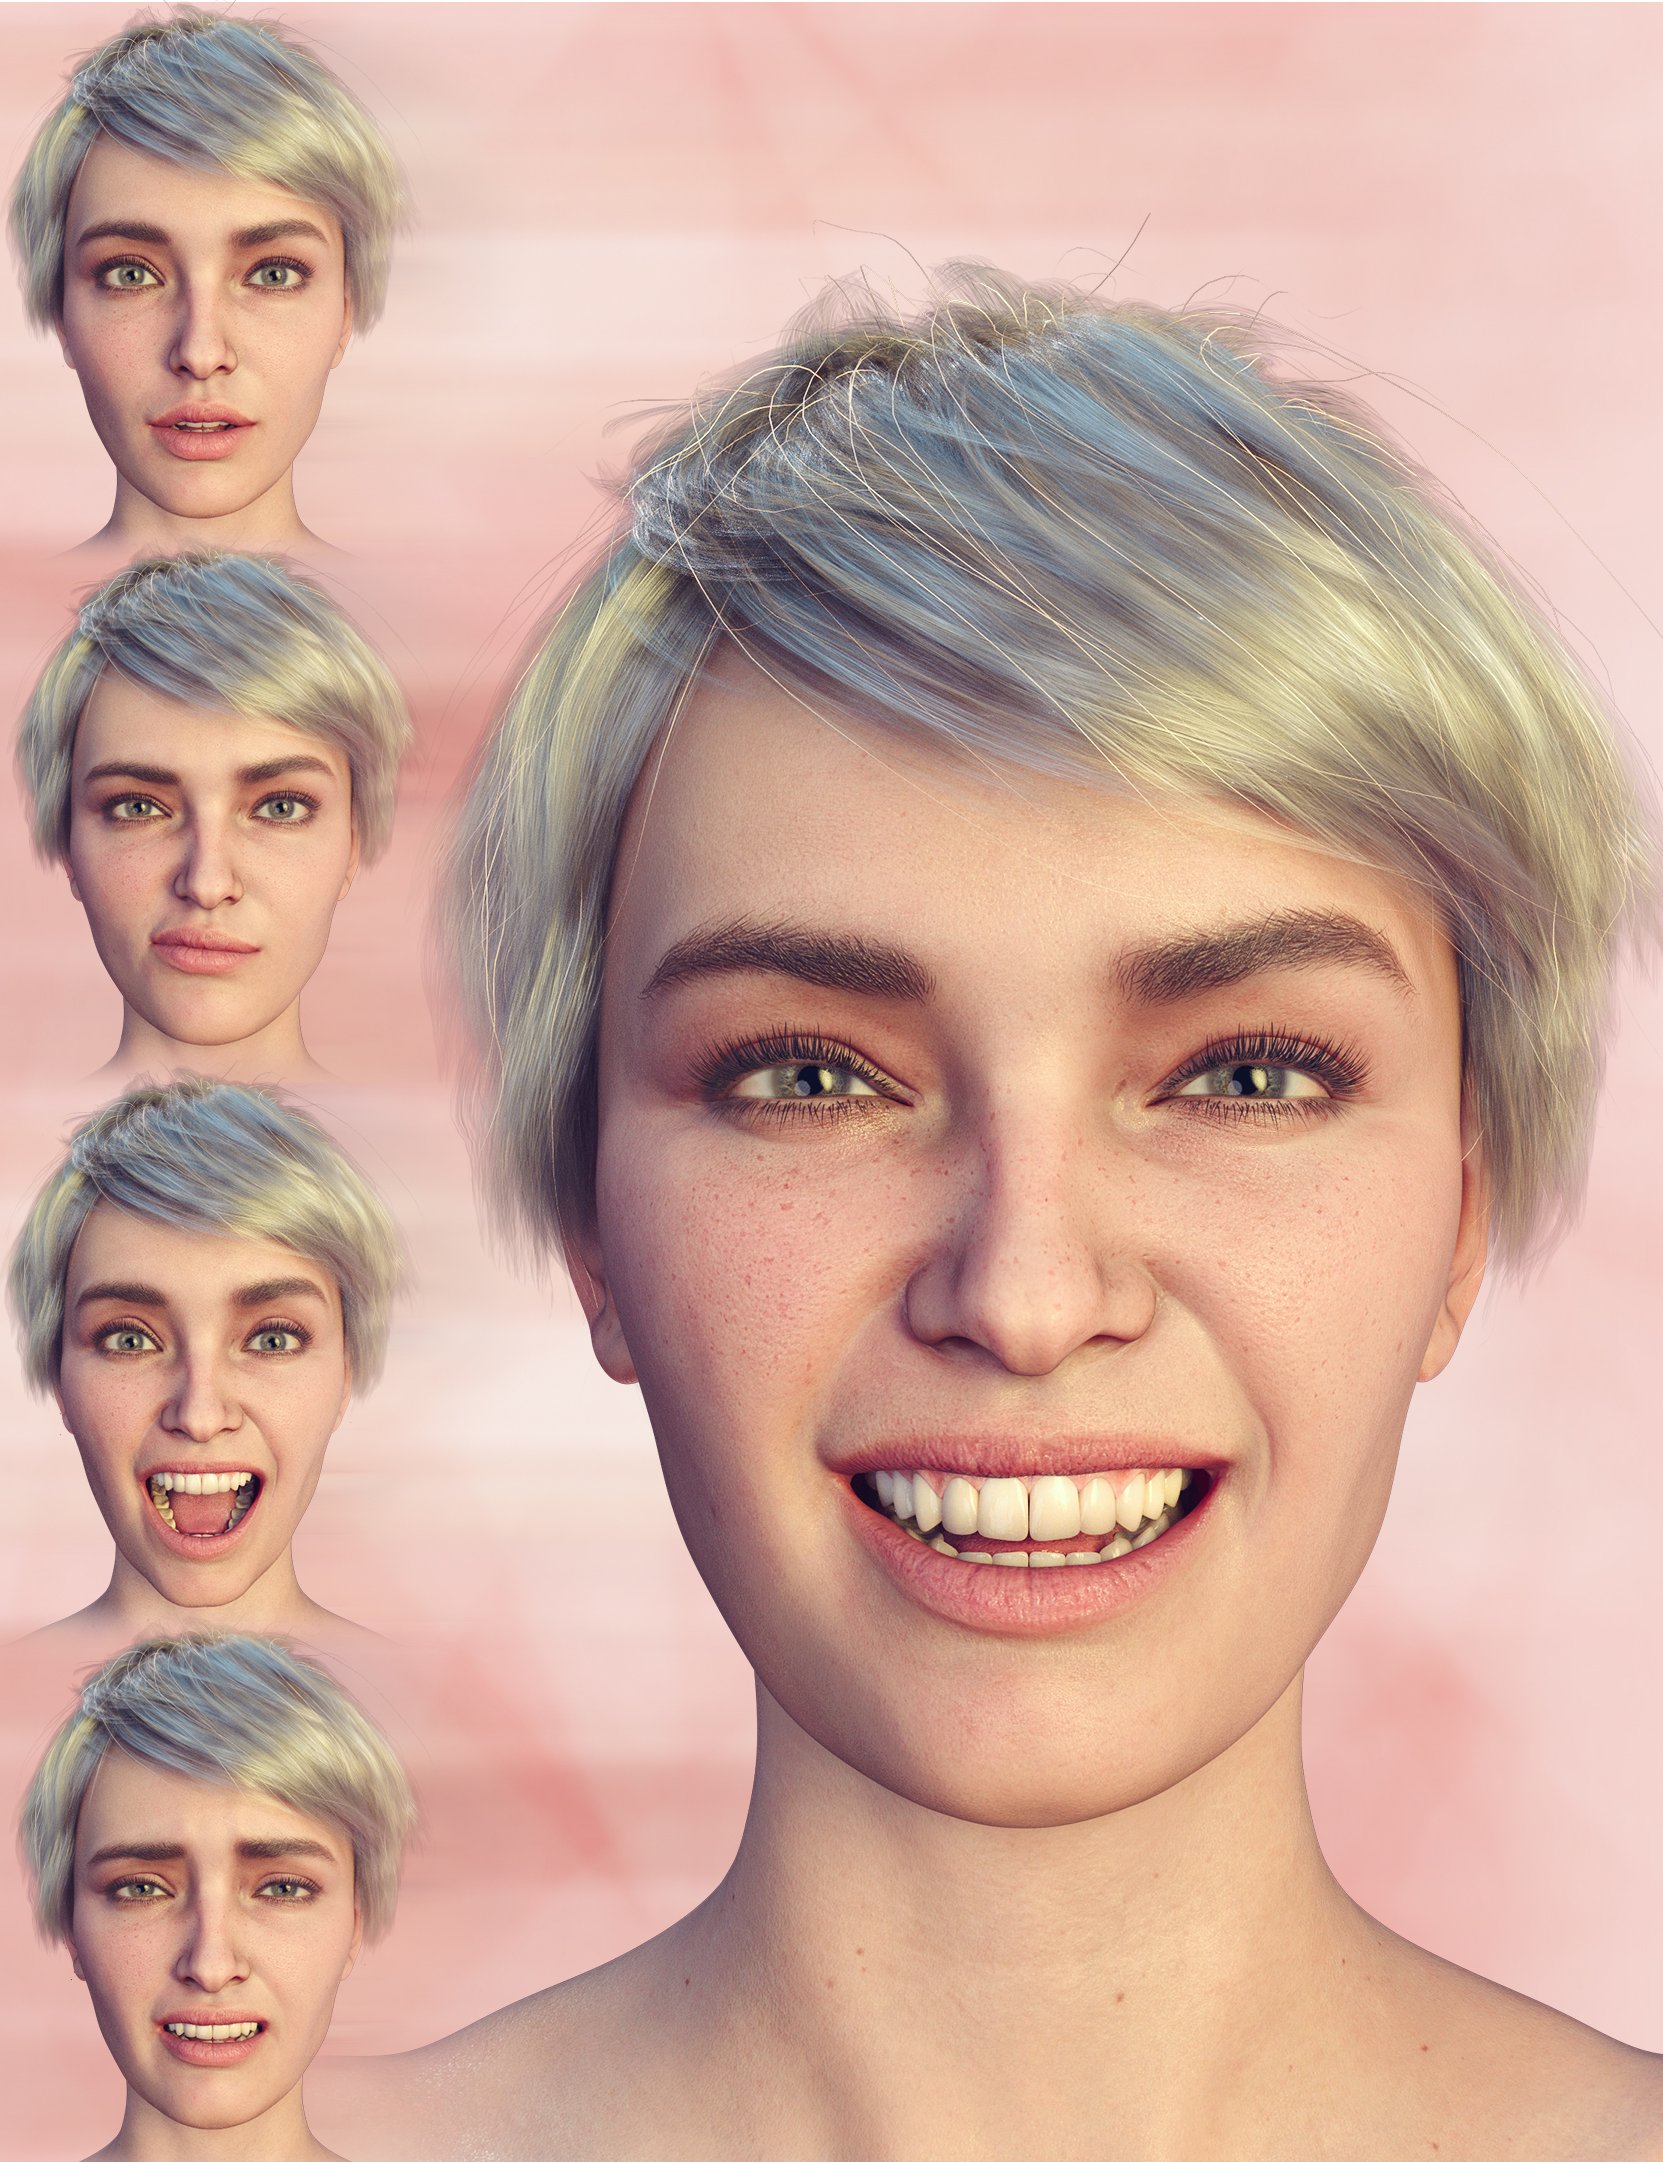 PTF Loves Me - Loves Me Not Expressions for Genesis 8.1  Female